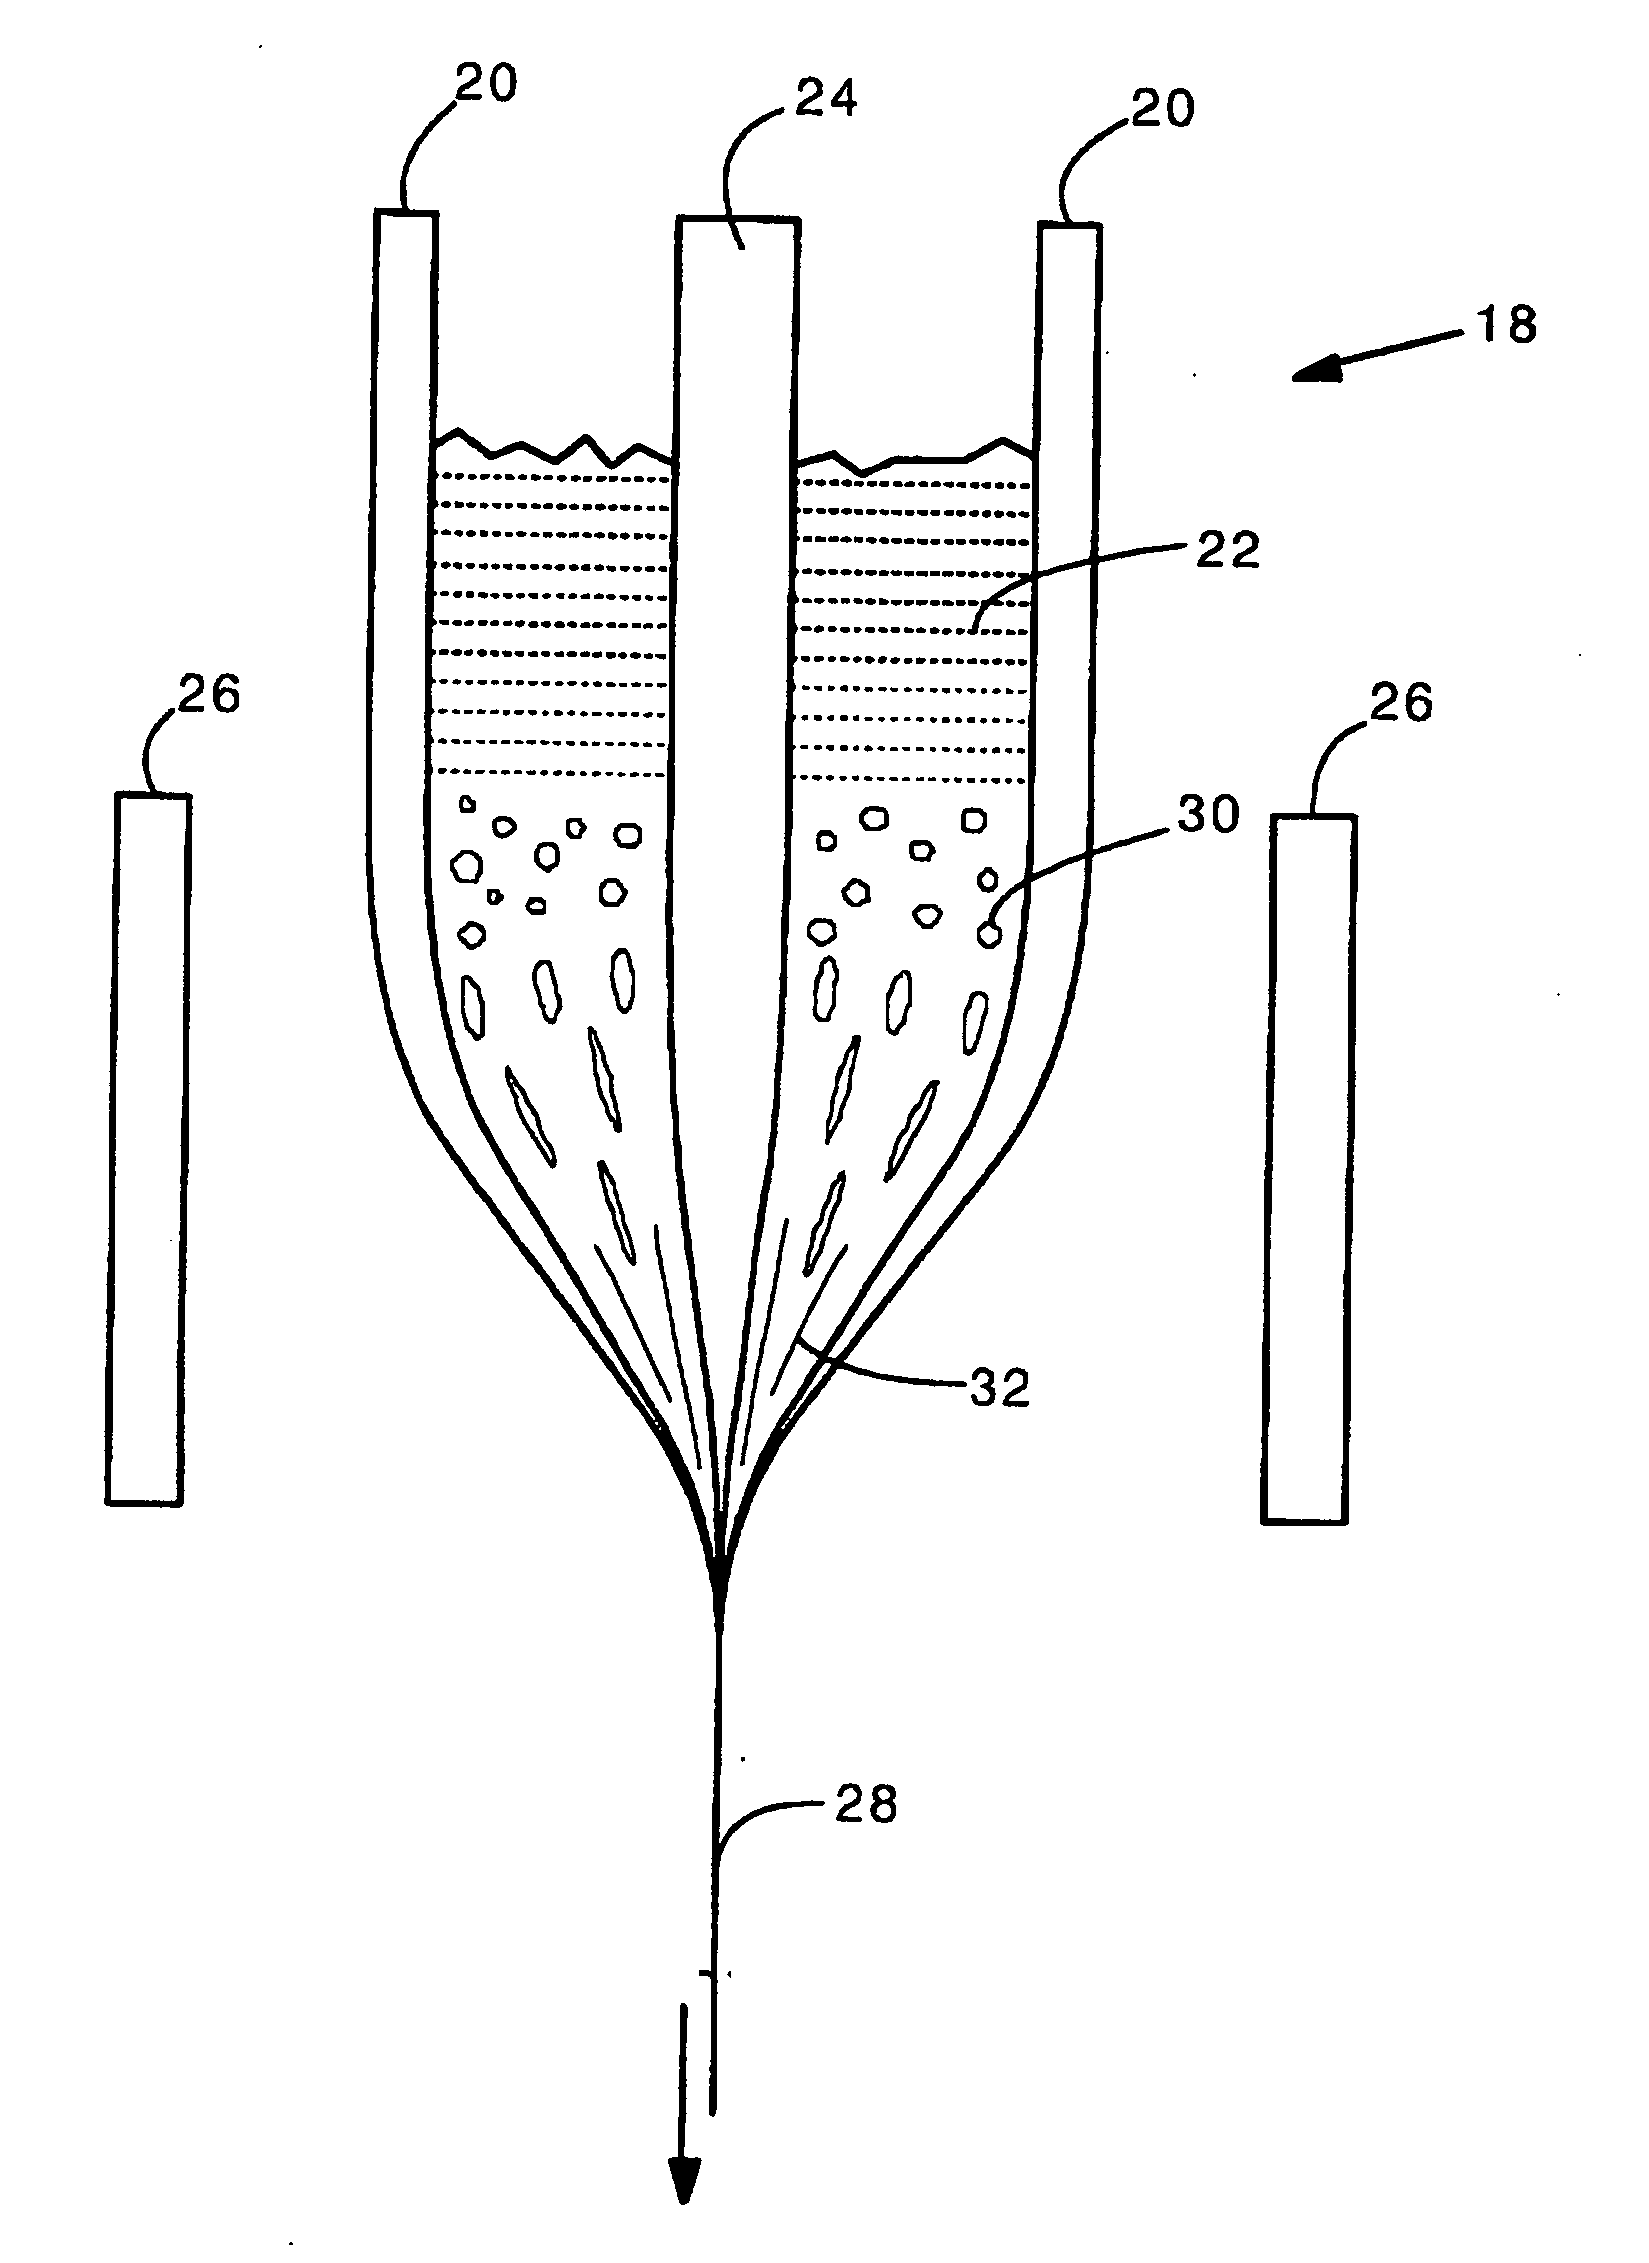 Holey optical fiber with random pattern of holes and method for making same